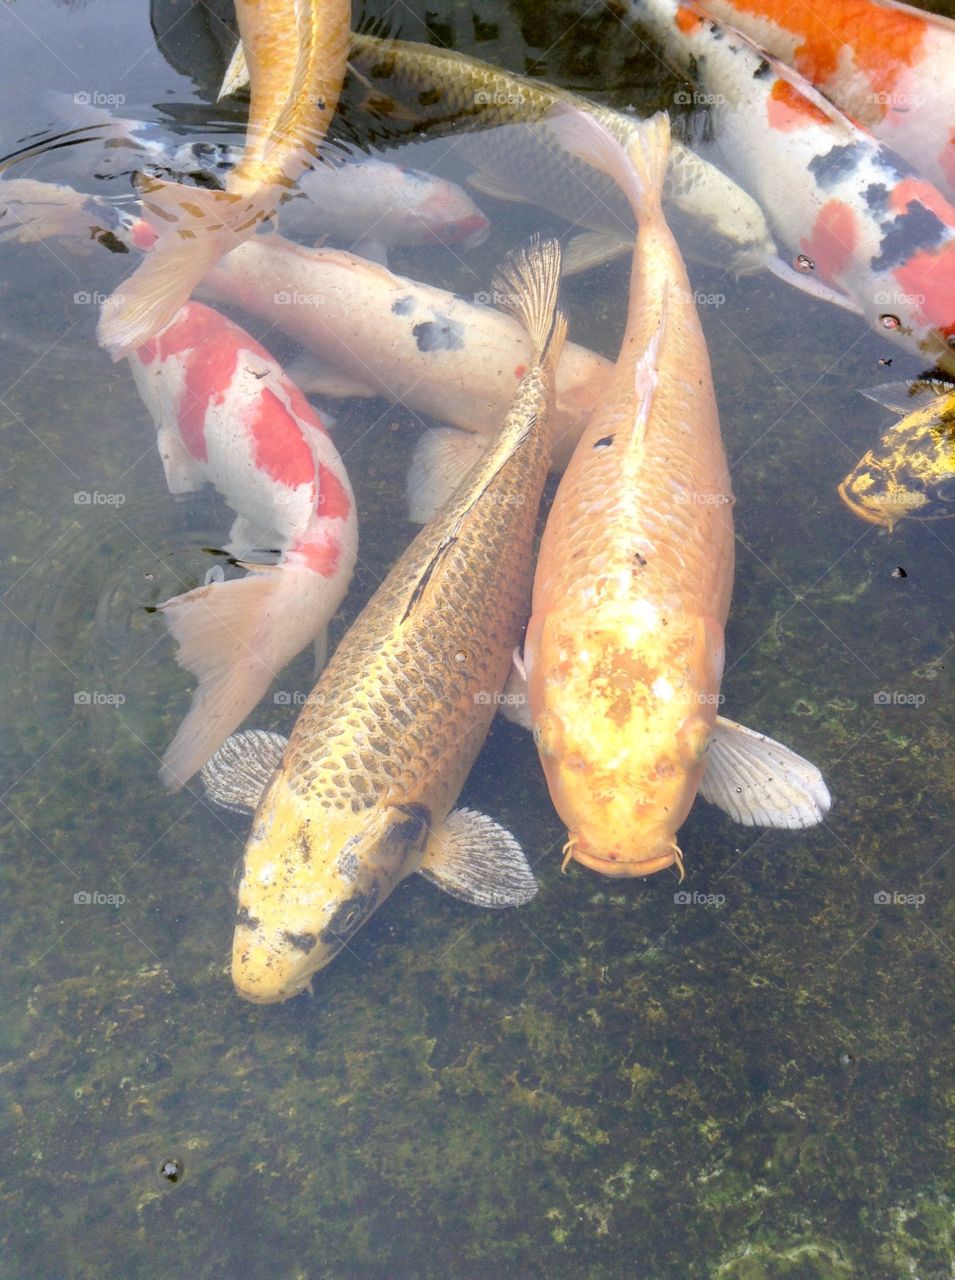 Carps are in every little lake in Japan
